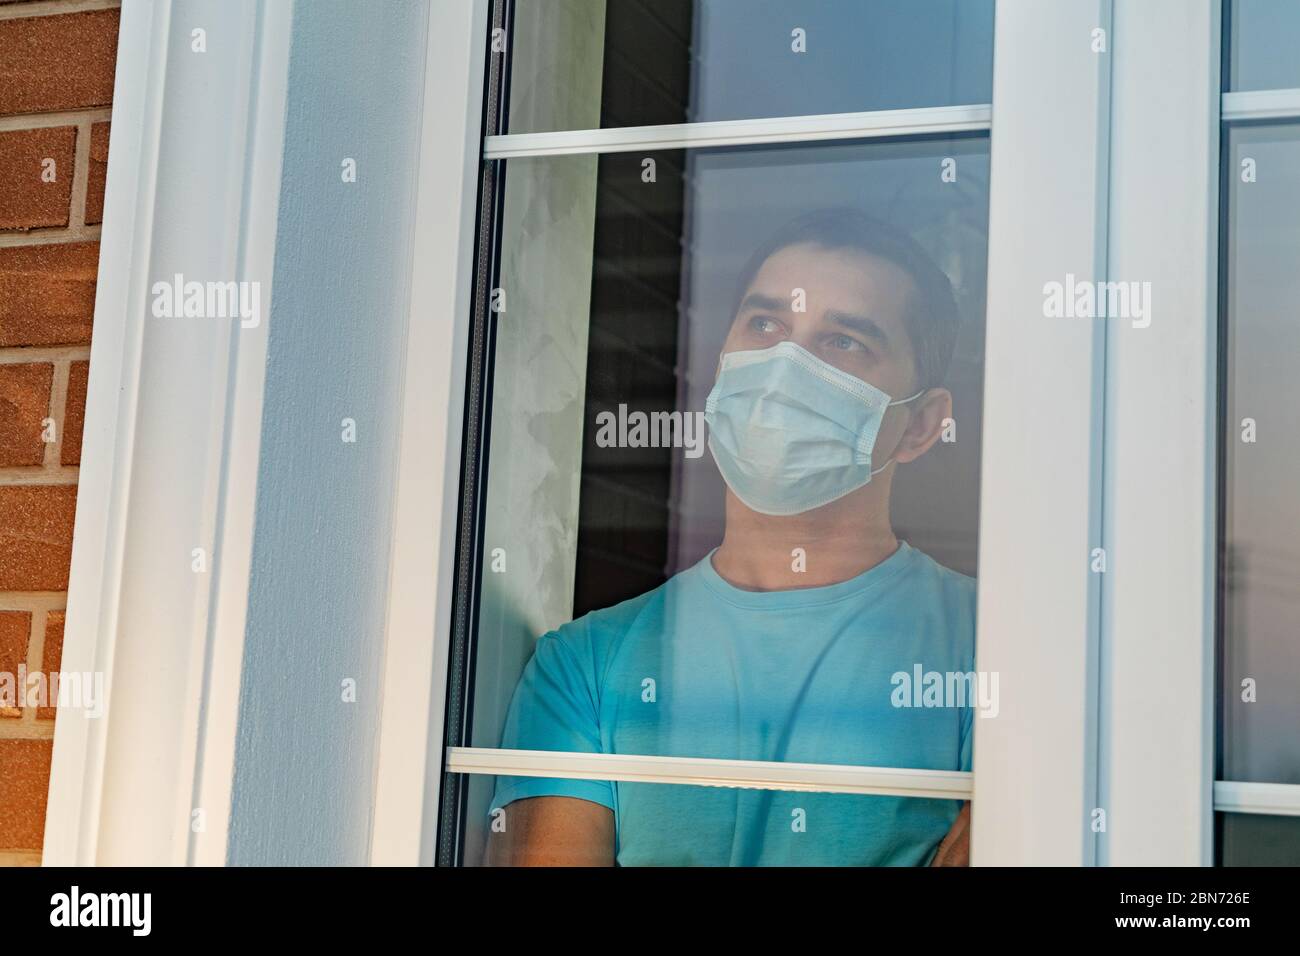 Infected man in medical mask on self-isolation Stock Photo